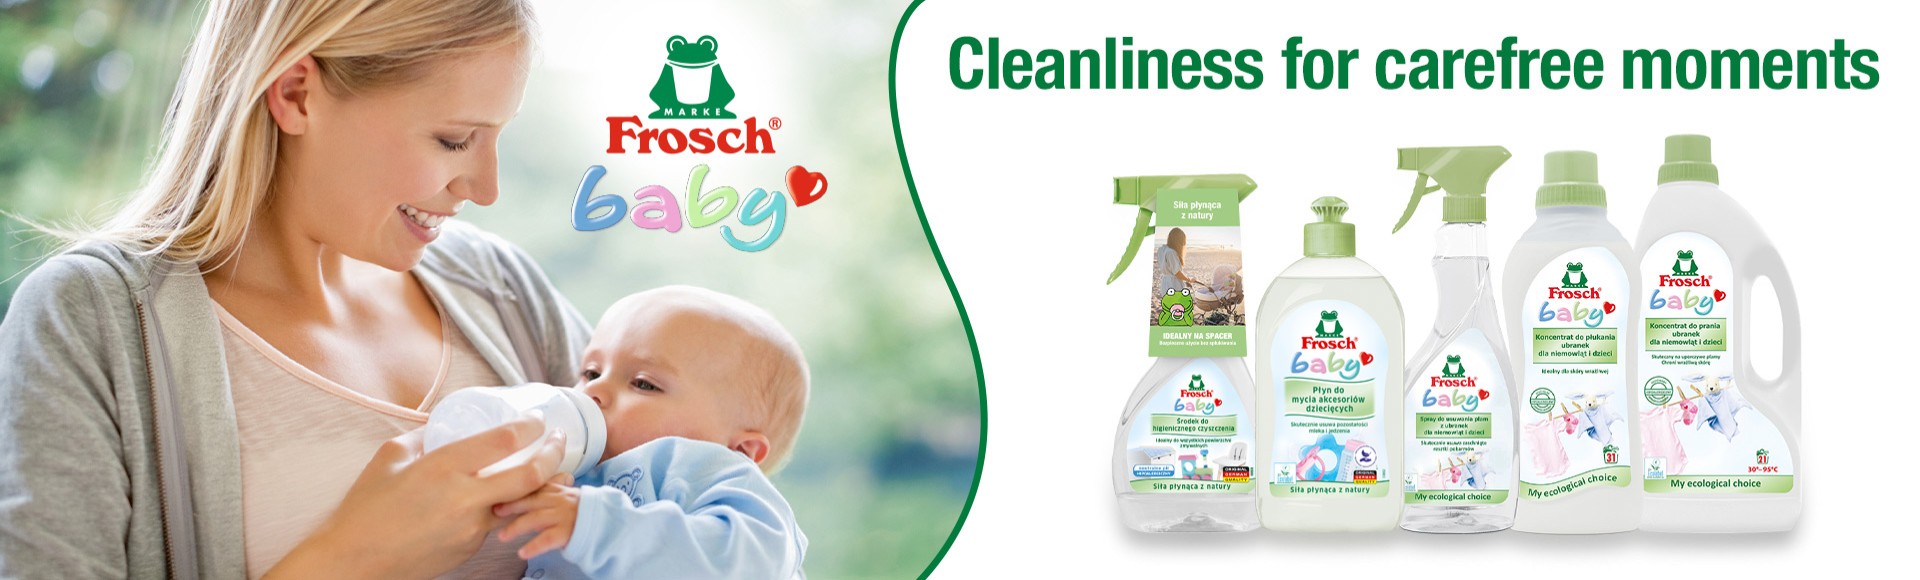 Frosch UAE - Babies deserve extra care, which is why we